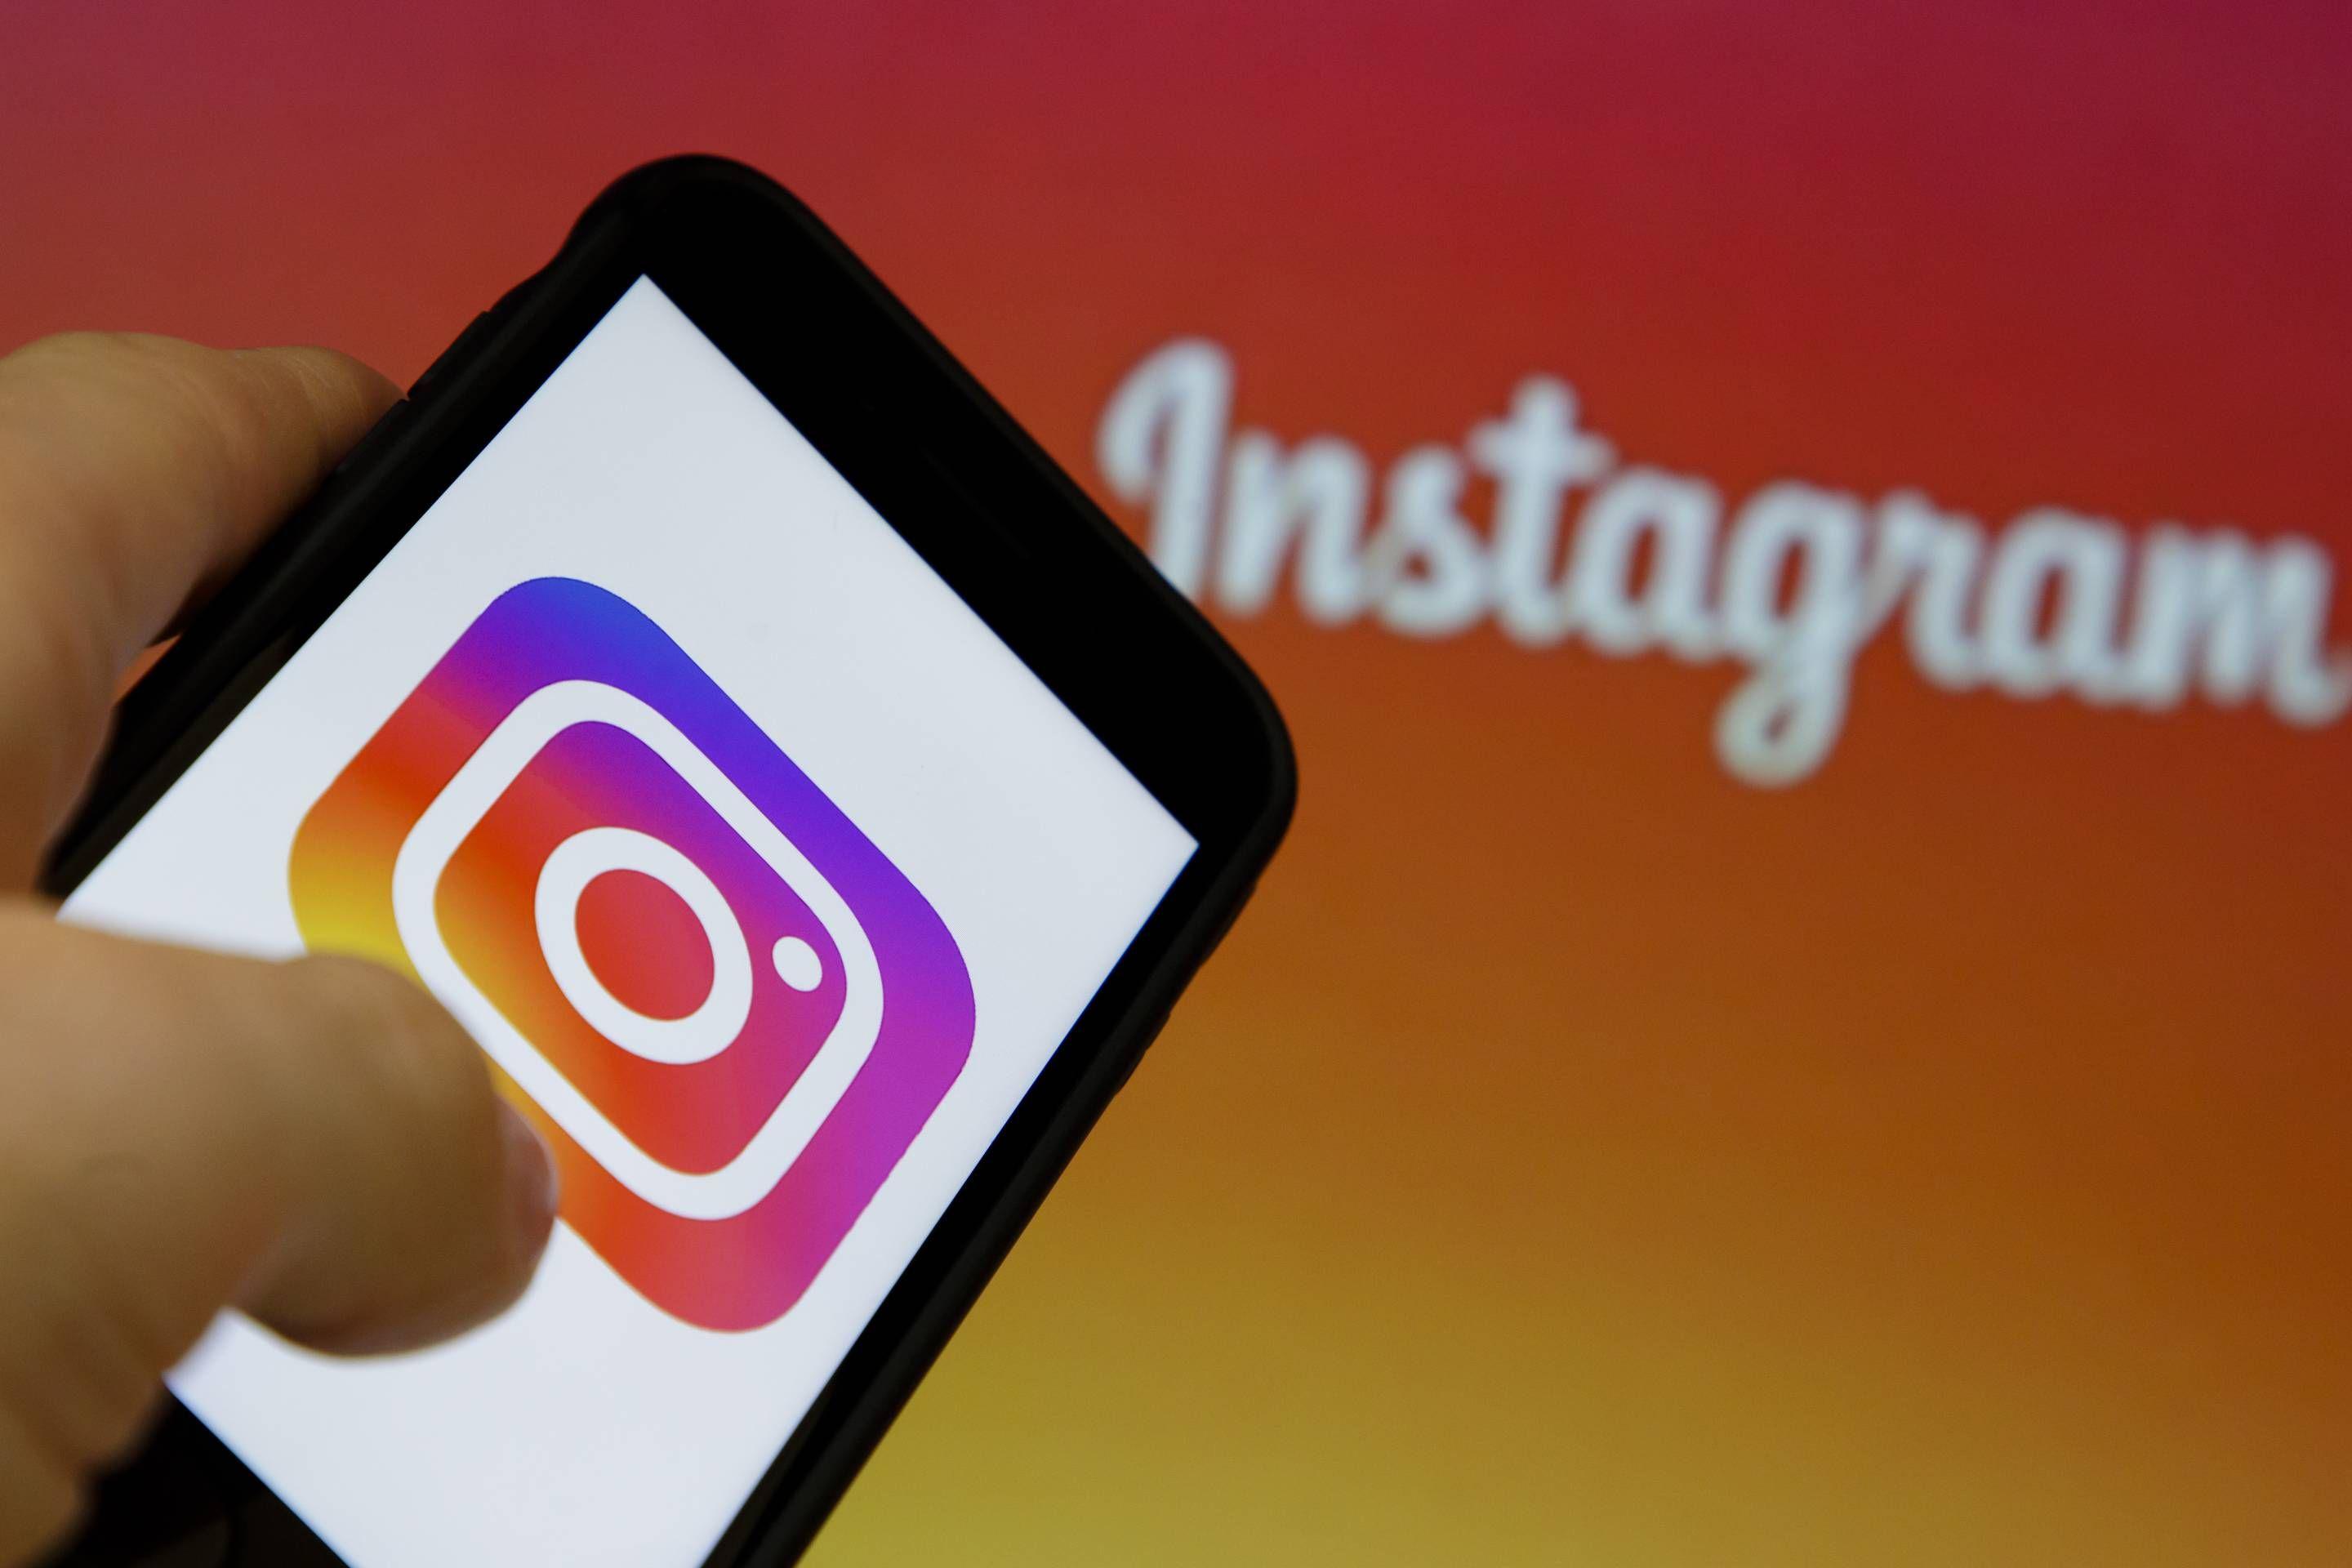 Cyberbullying Logo - Instagram Says It Can Now Detect Cyberbullying in Videos